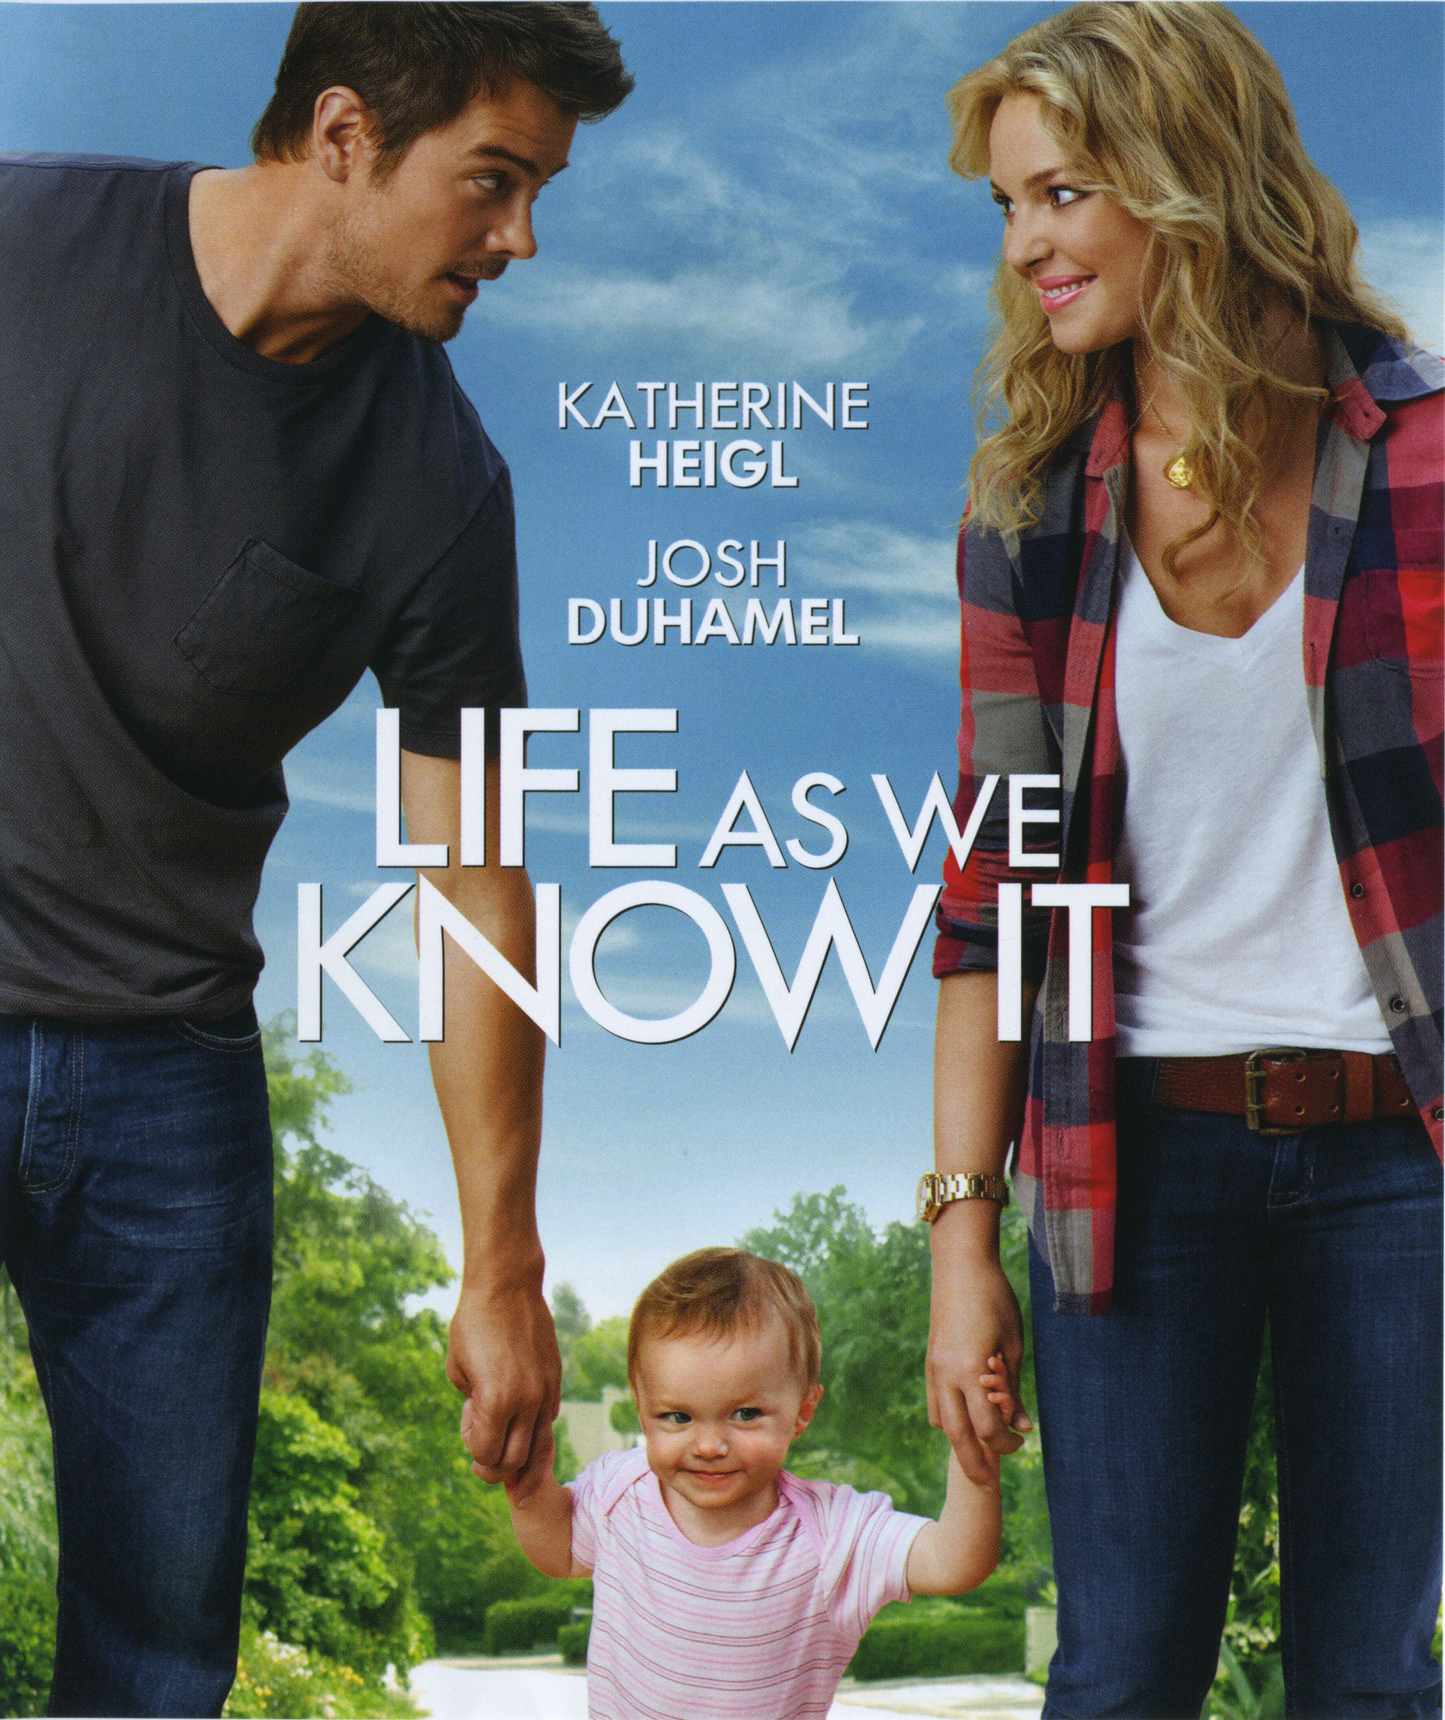 Life As We Know It - Blu-ray Comedy 2010 PG-13